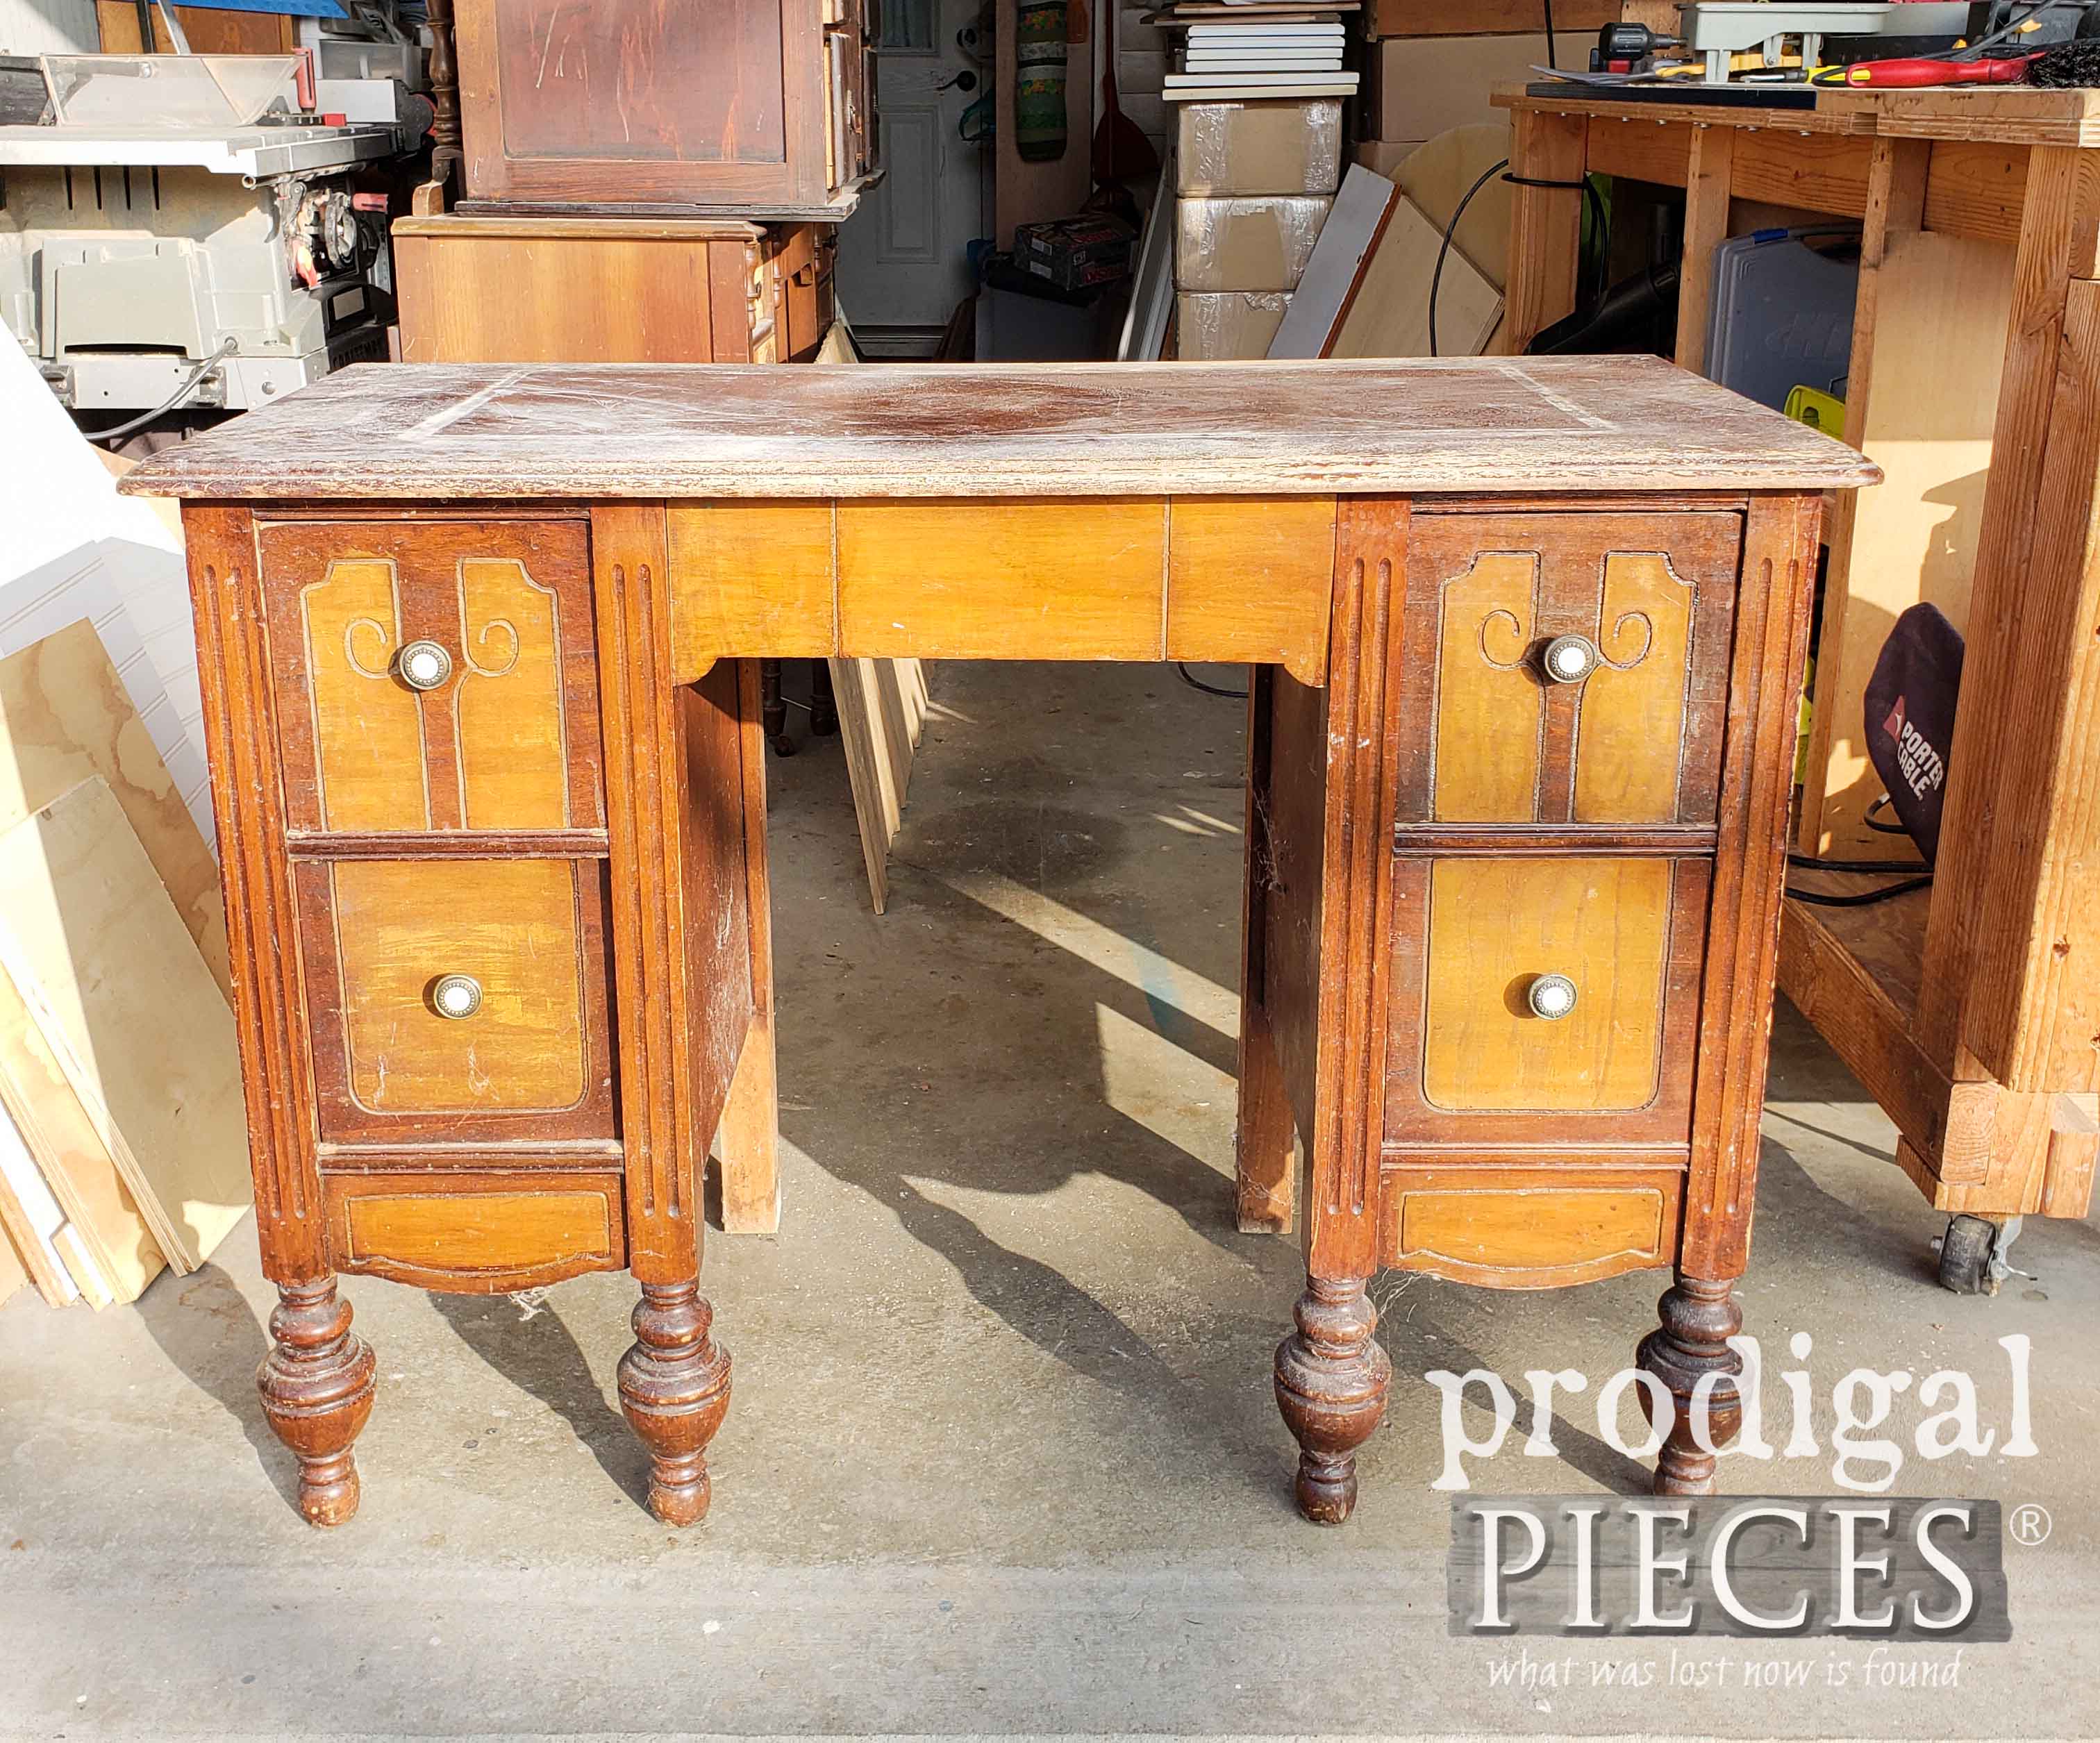 1920's Antique Dressing Table Found at Thrift Store Before Makeover by Larissa of Prodigal Pieces | prodigalpieces.com